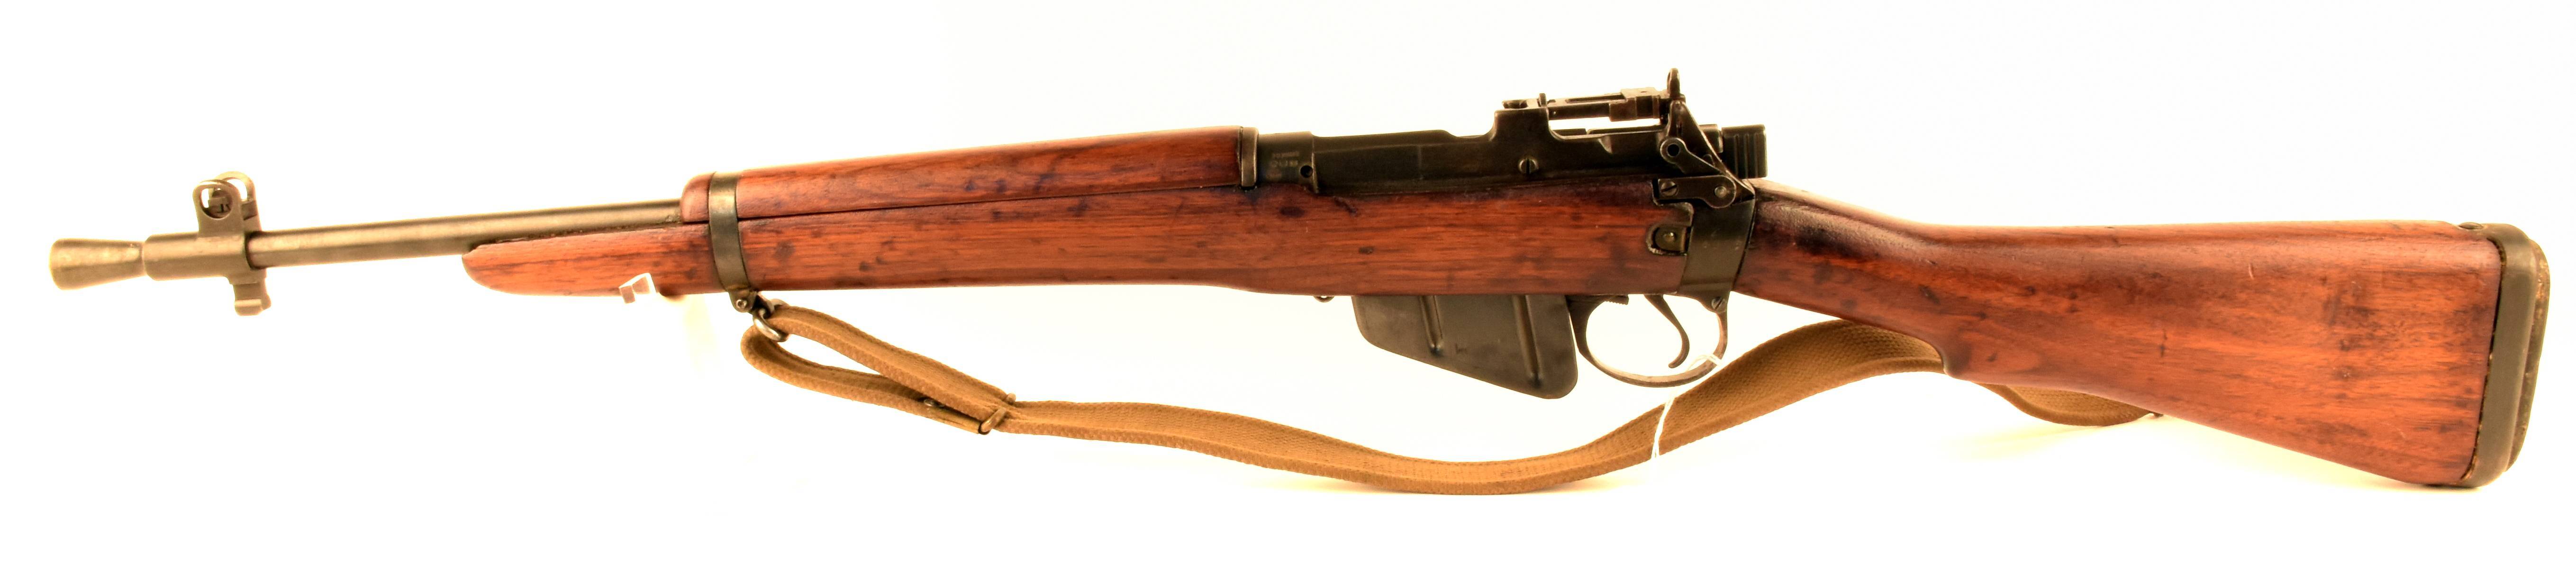 Lee-enfield rifle series - internet movie firearms database - guns in movies, tv and video games